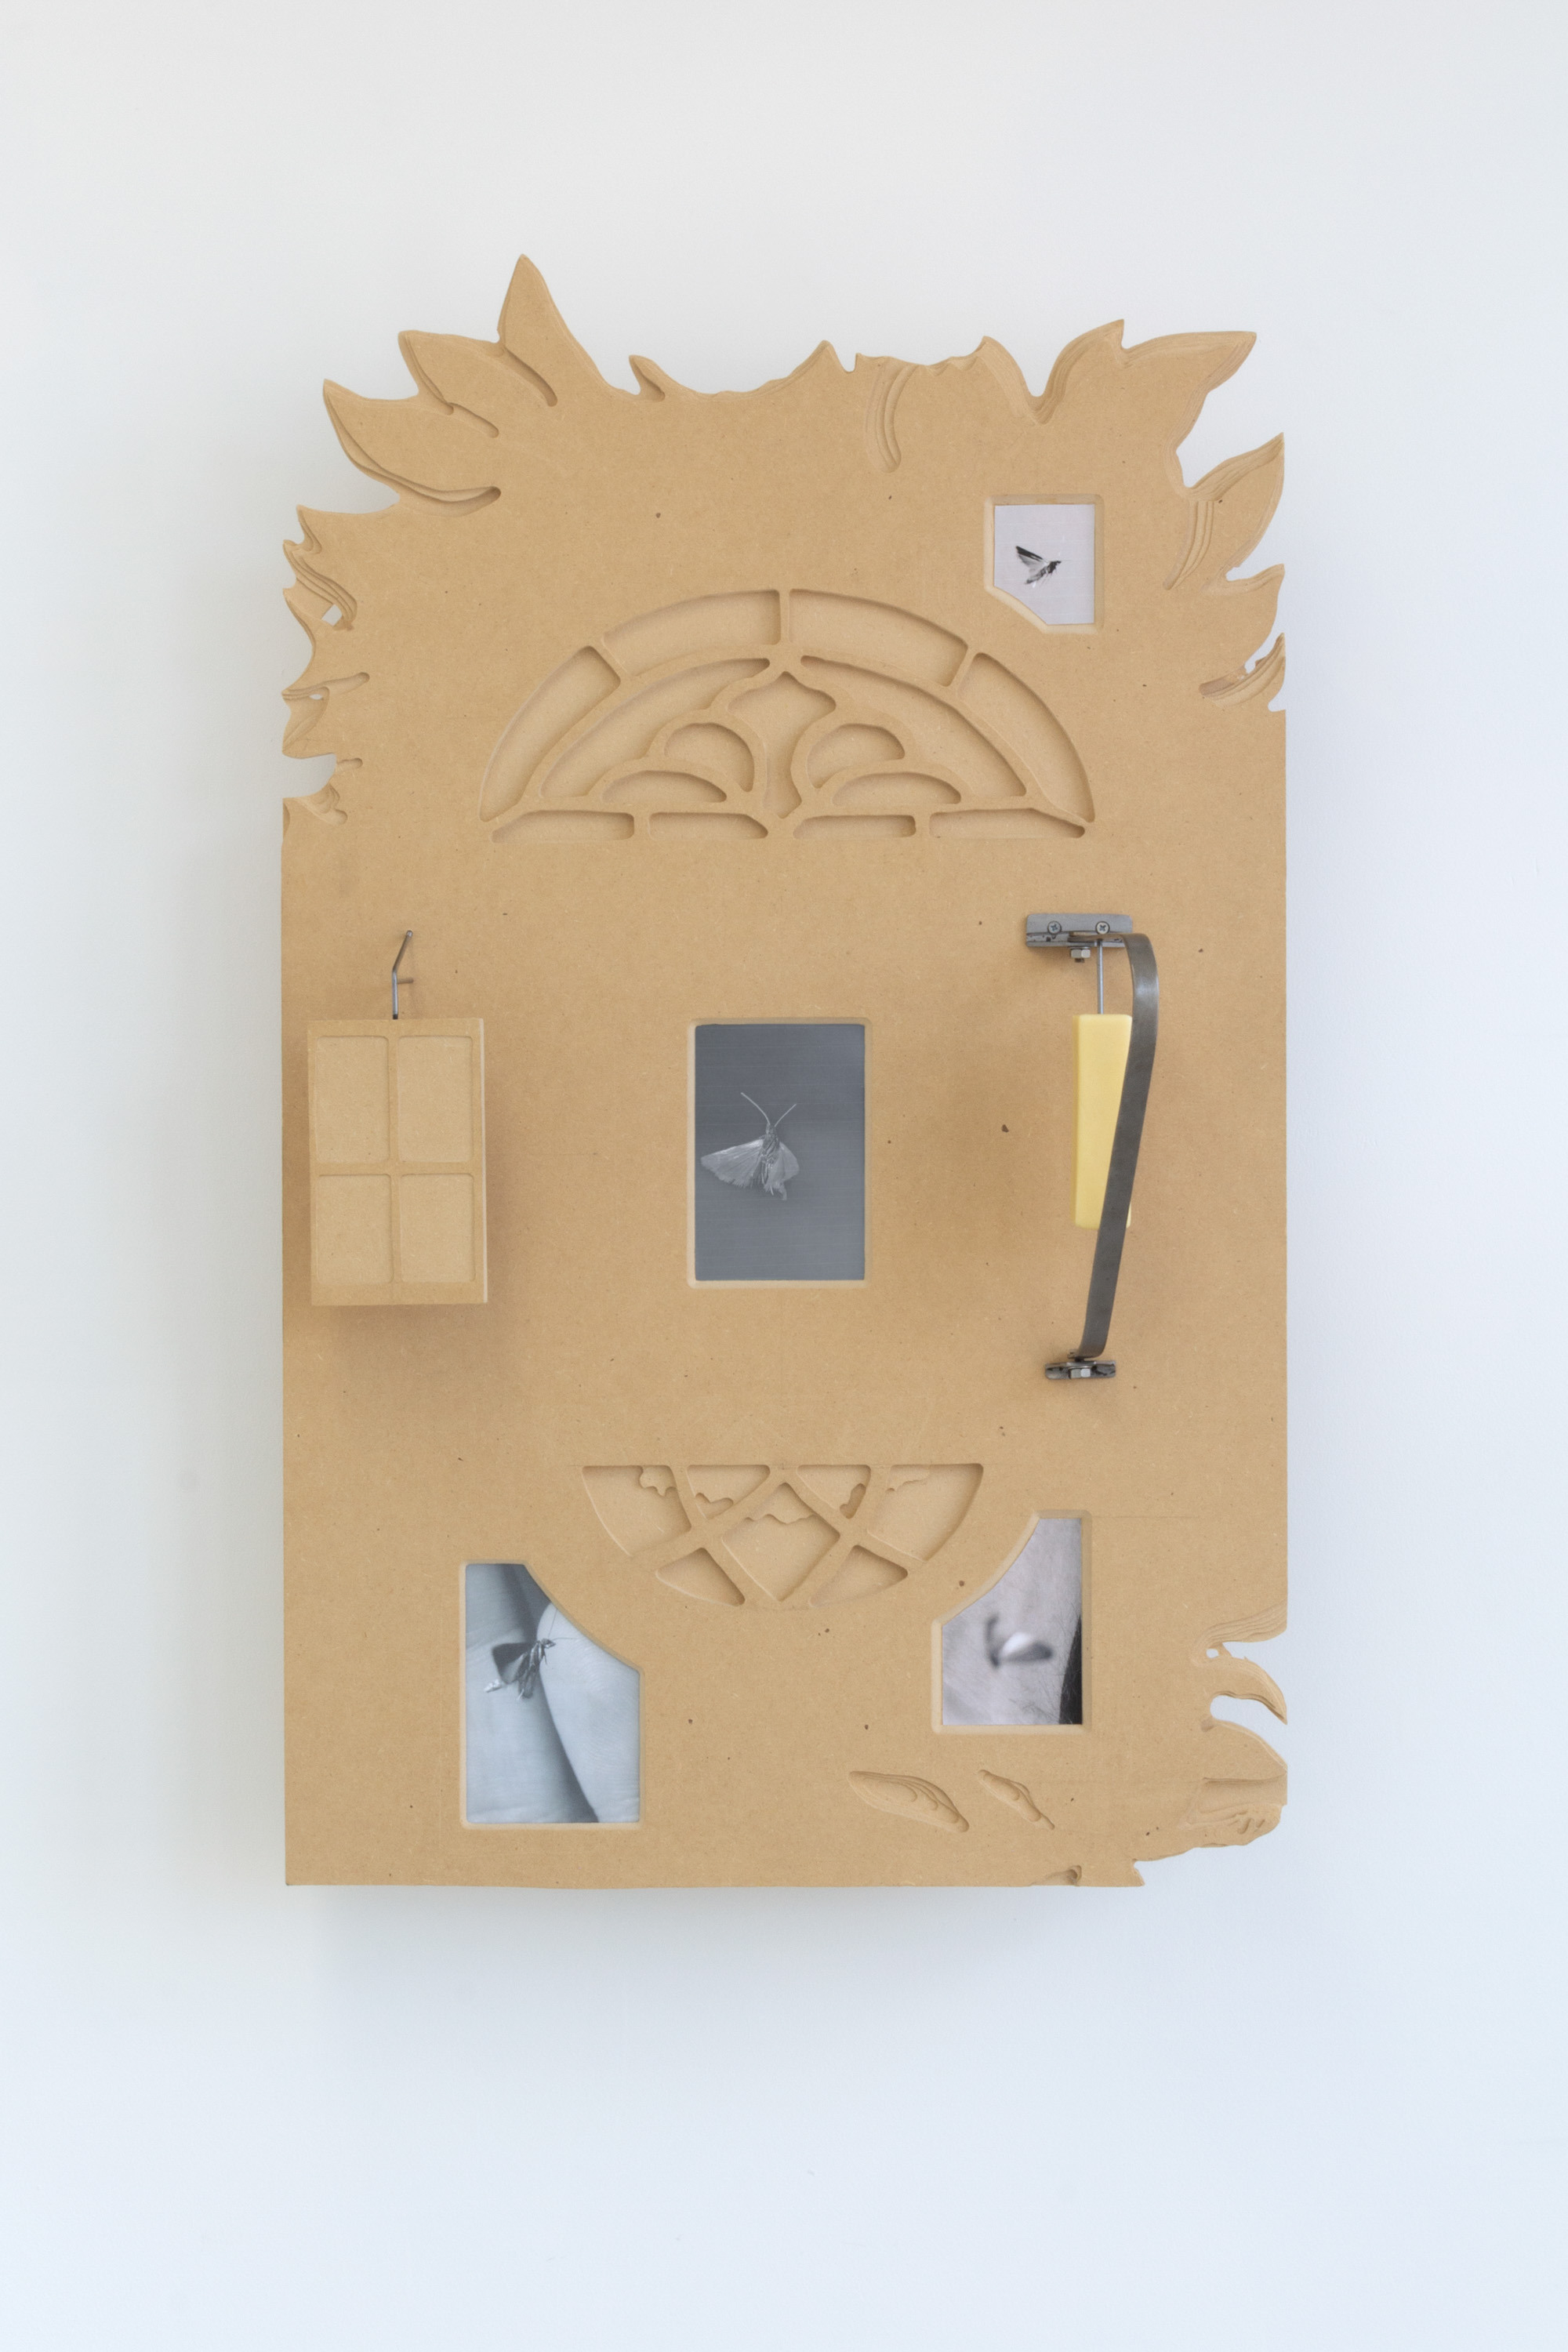 Bradley Marshall, An Imperfect Offering, A Windowless Room (Skeeeedaddle!), 2021, Hand-cut MDF, inkjet print, steel, wax, tin can, pencil with lead replaced with steel, hardware, and adhesives, 26 x 36.5 x 8 in